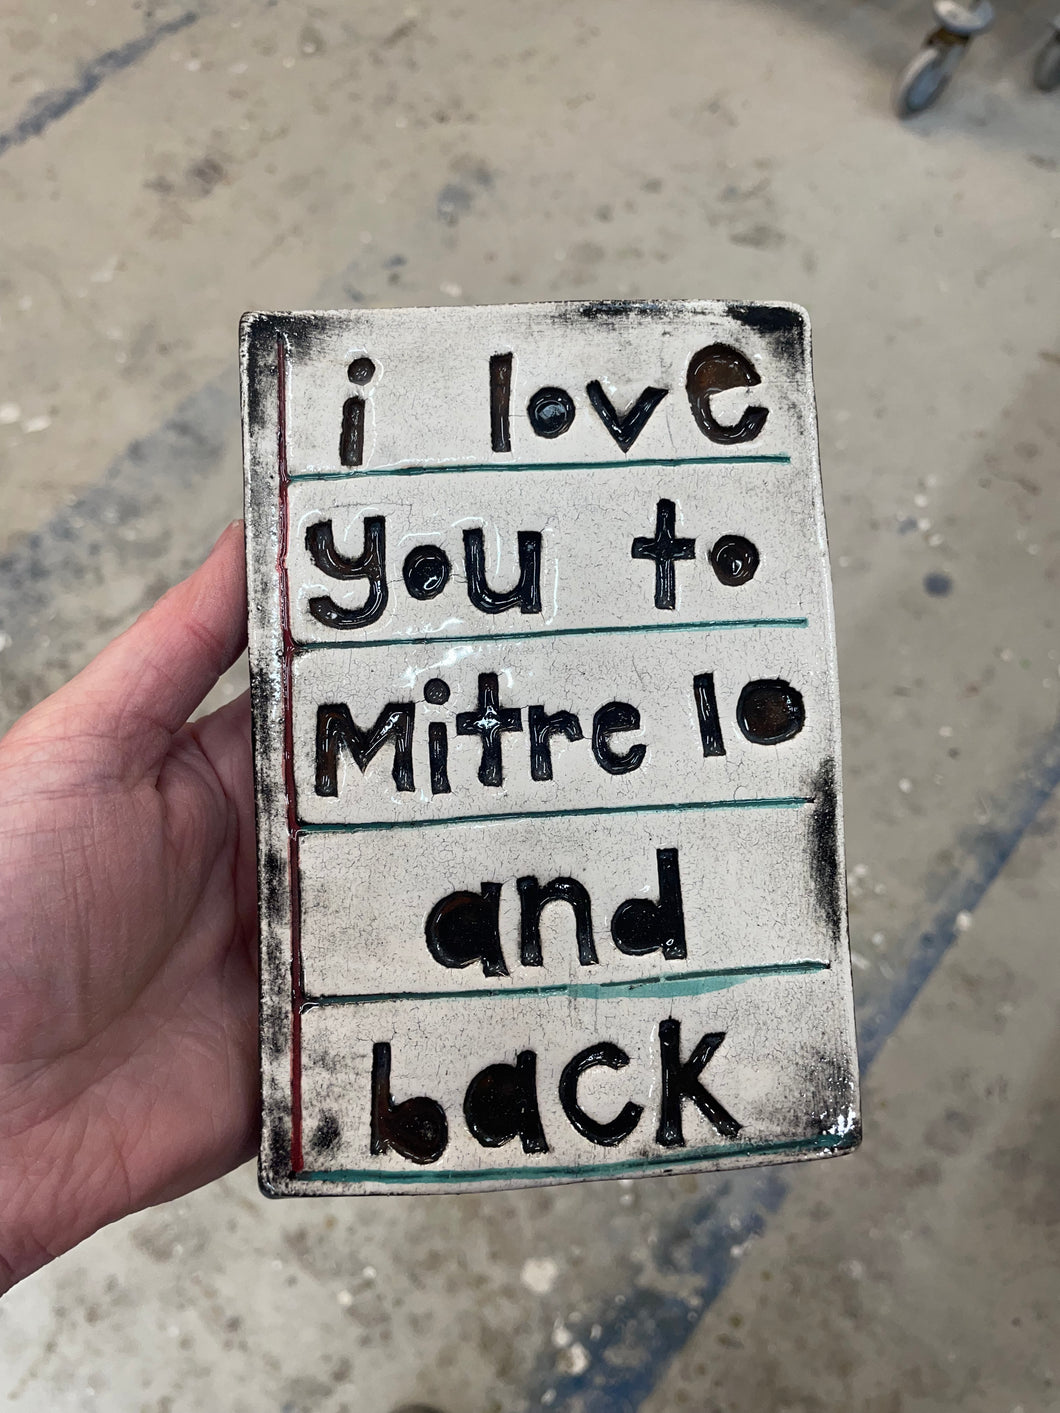 I love you to mitre 10 and back tile.